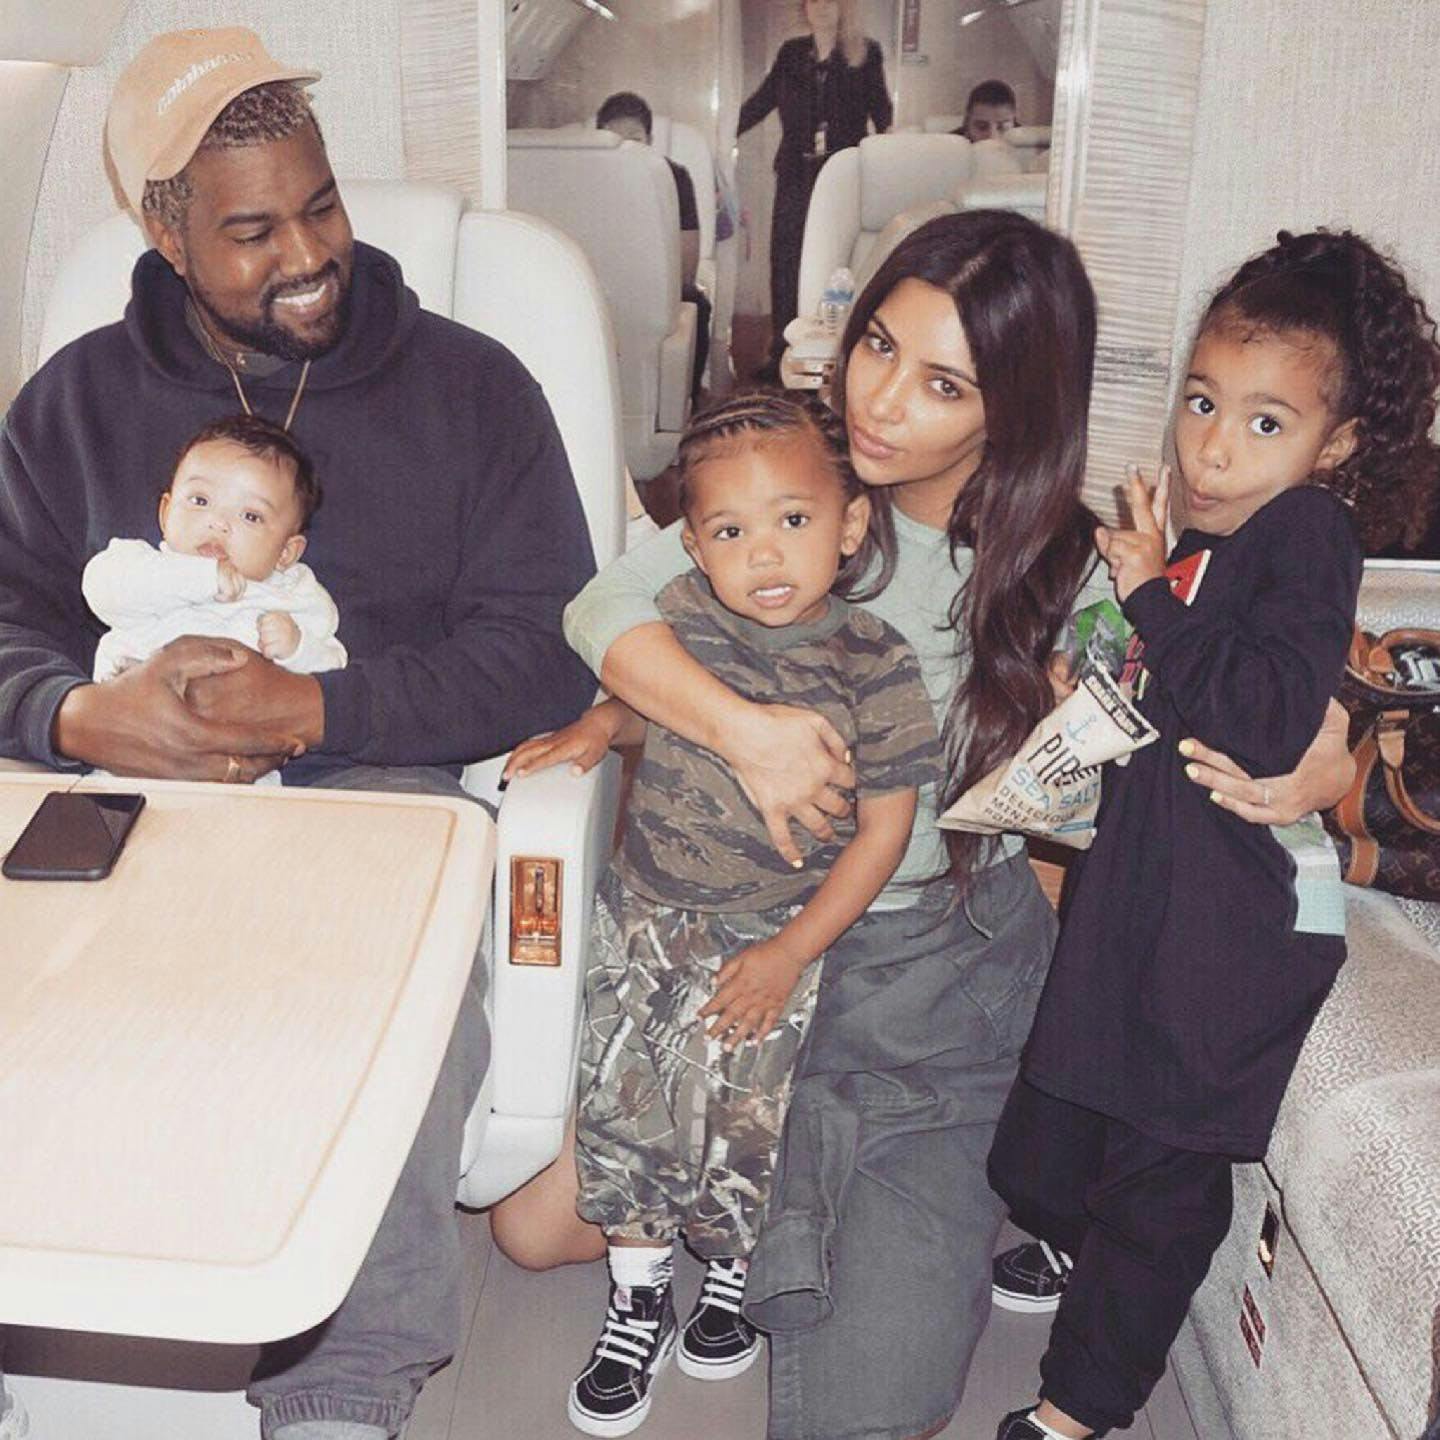 Kim Kardashian with Kanye West with their children, North West, Chicago West, and Saint West on an airplane.